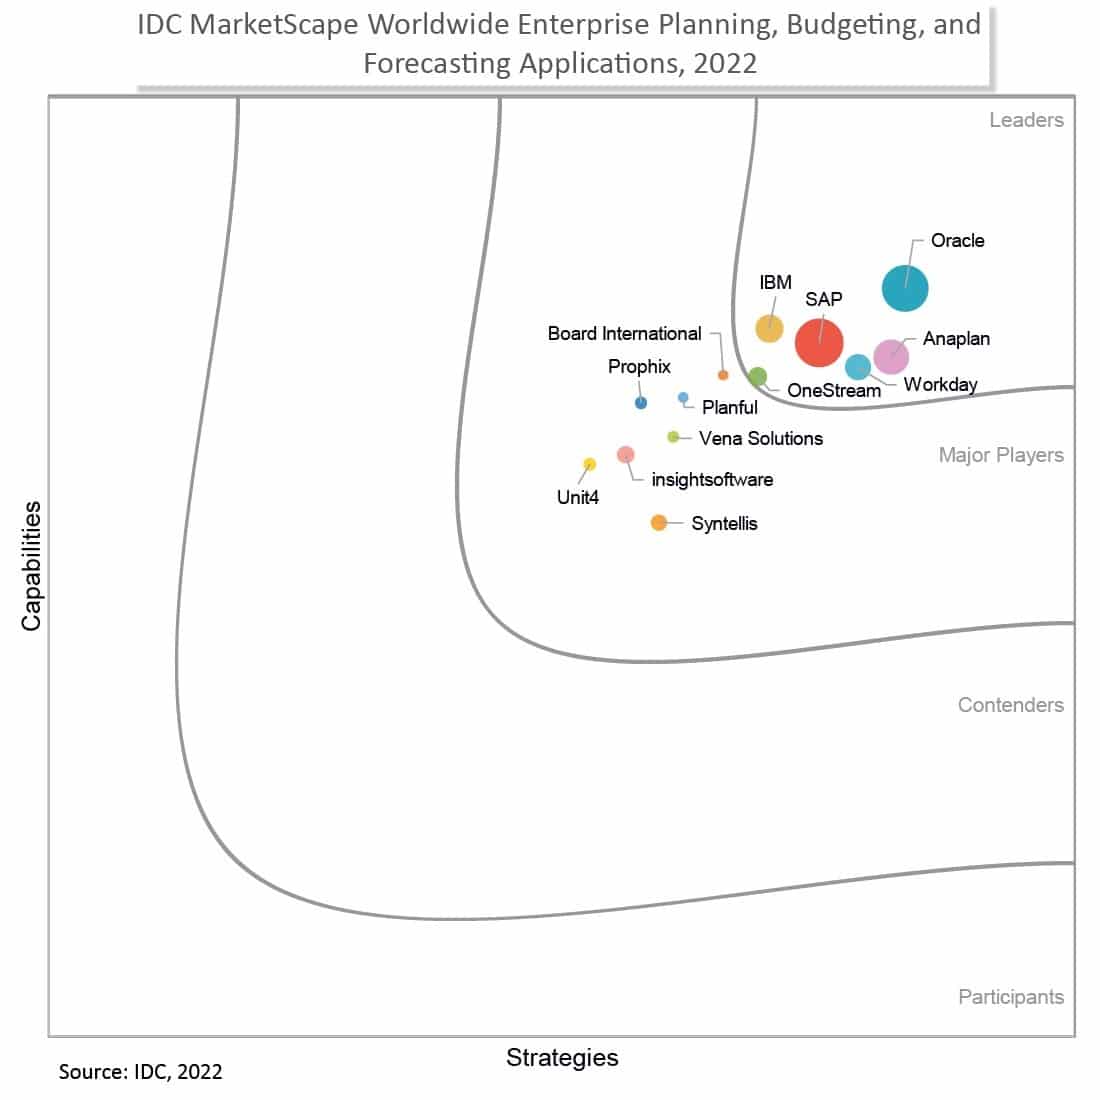 2022 IDC MarketScape for Worldwide Enterprise Planning, Budgeting and Forecasting Applications